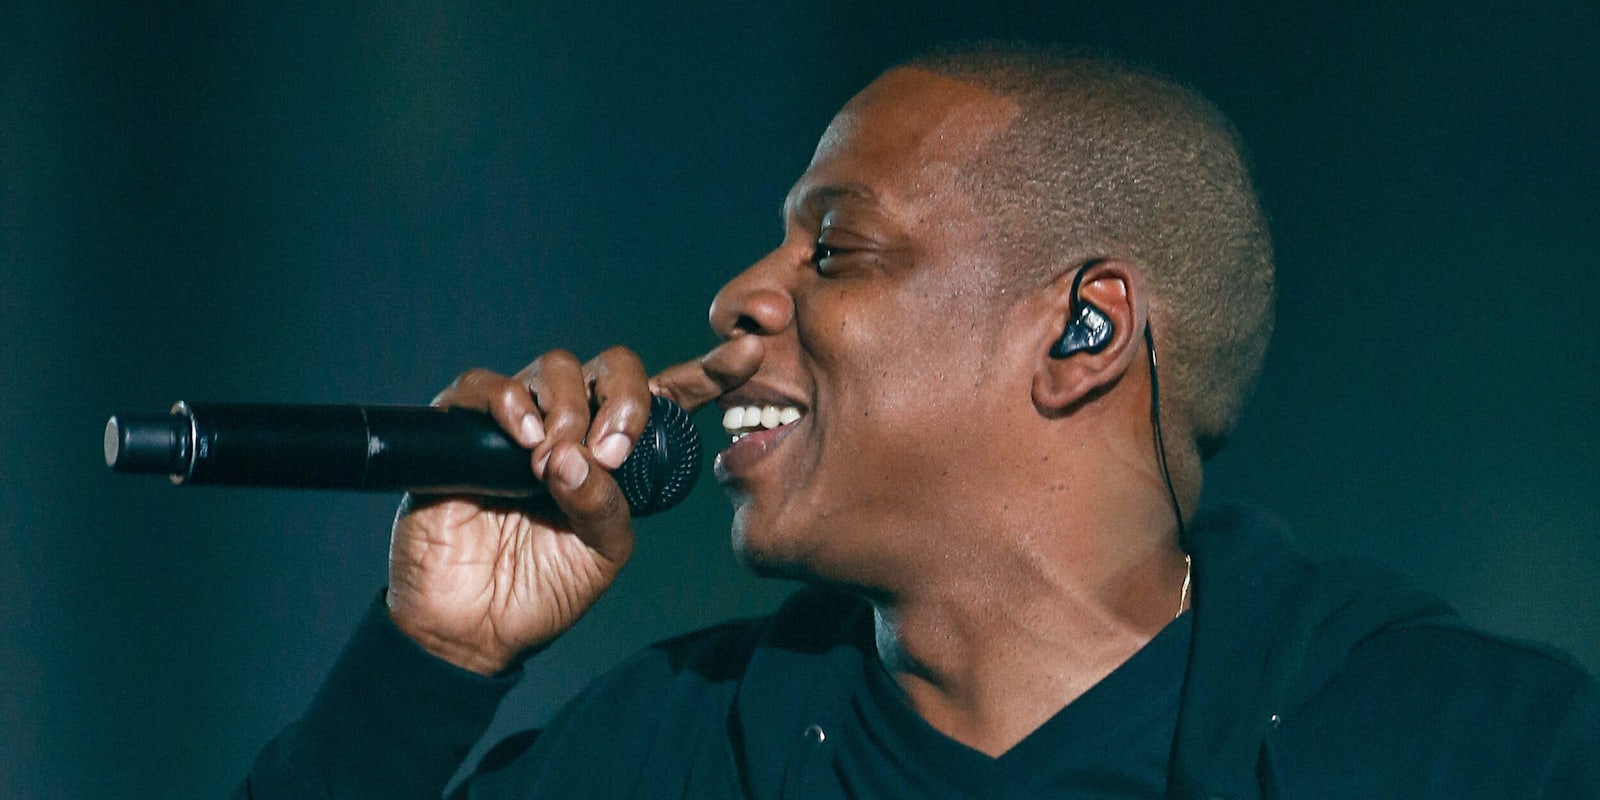 Jay Z smiling while performing